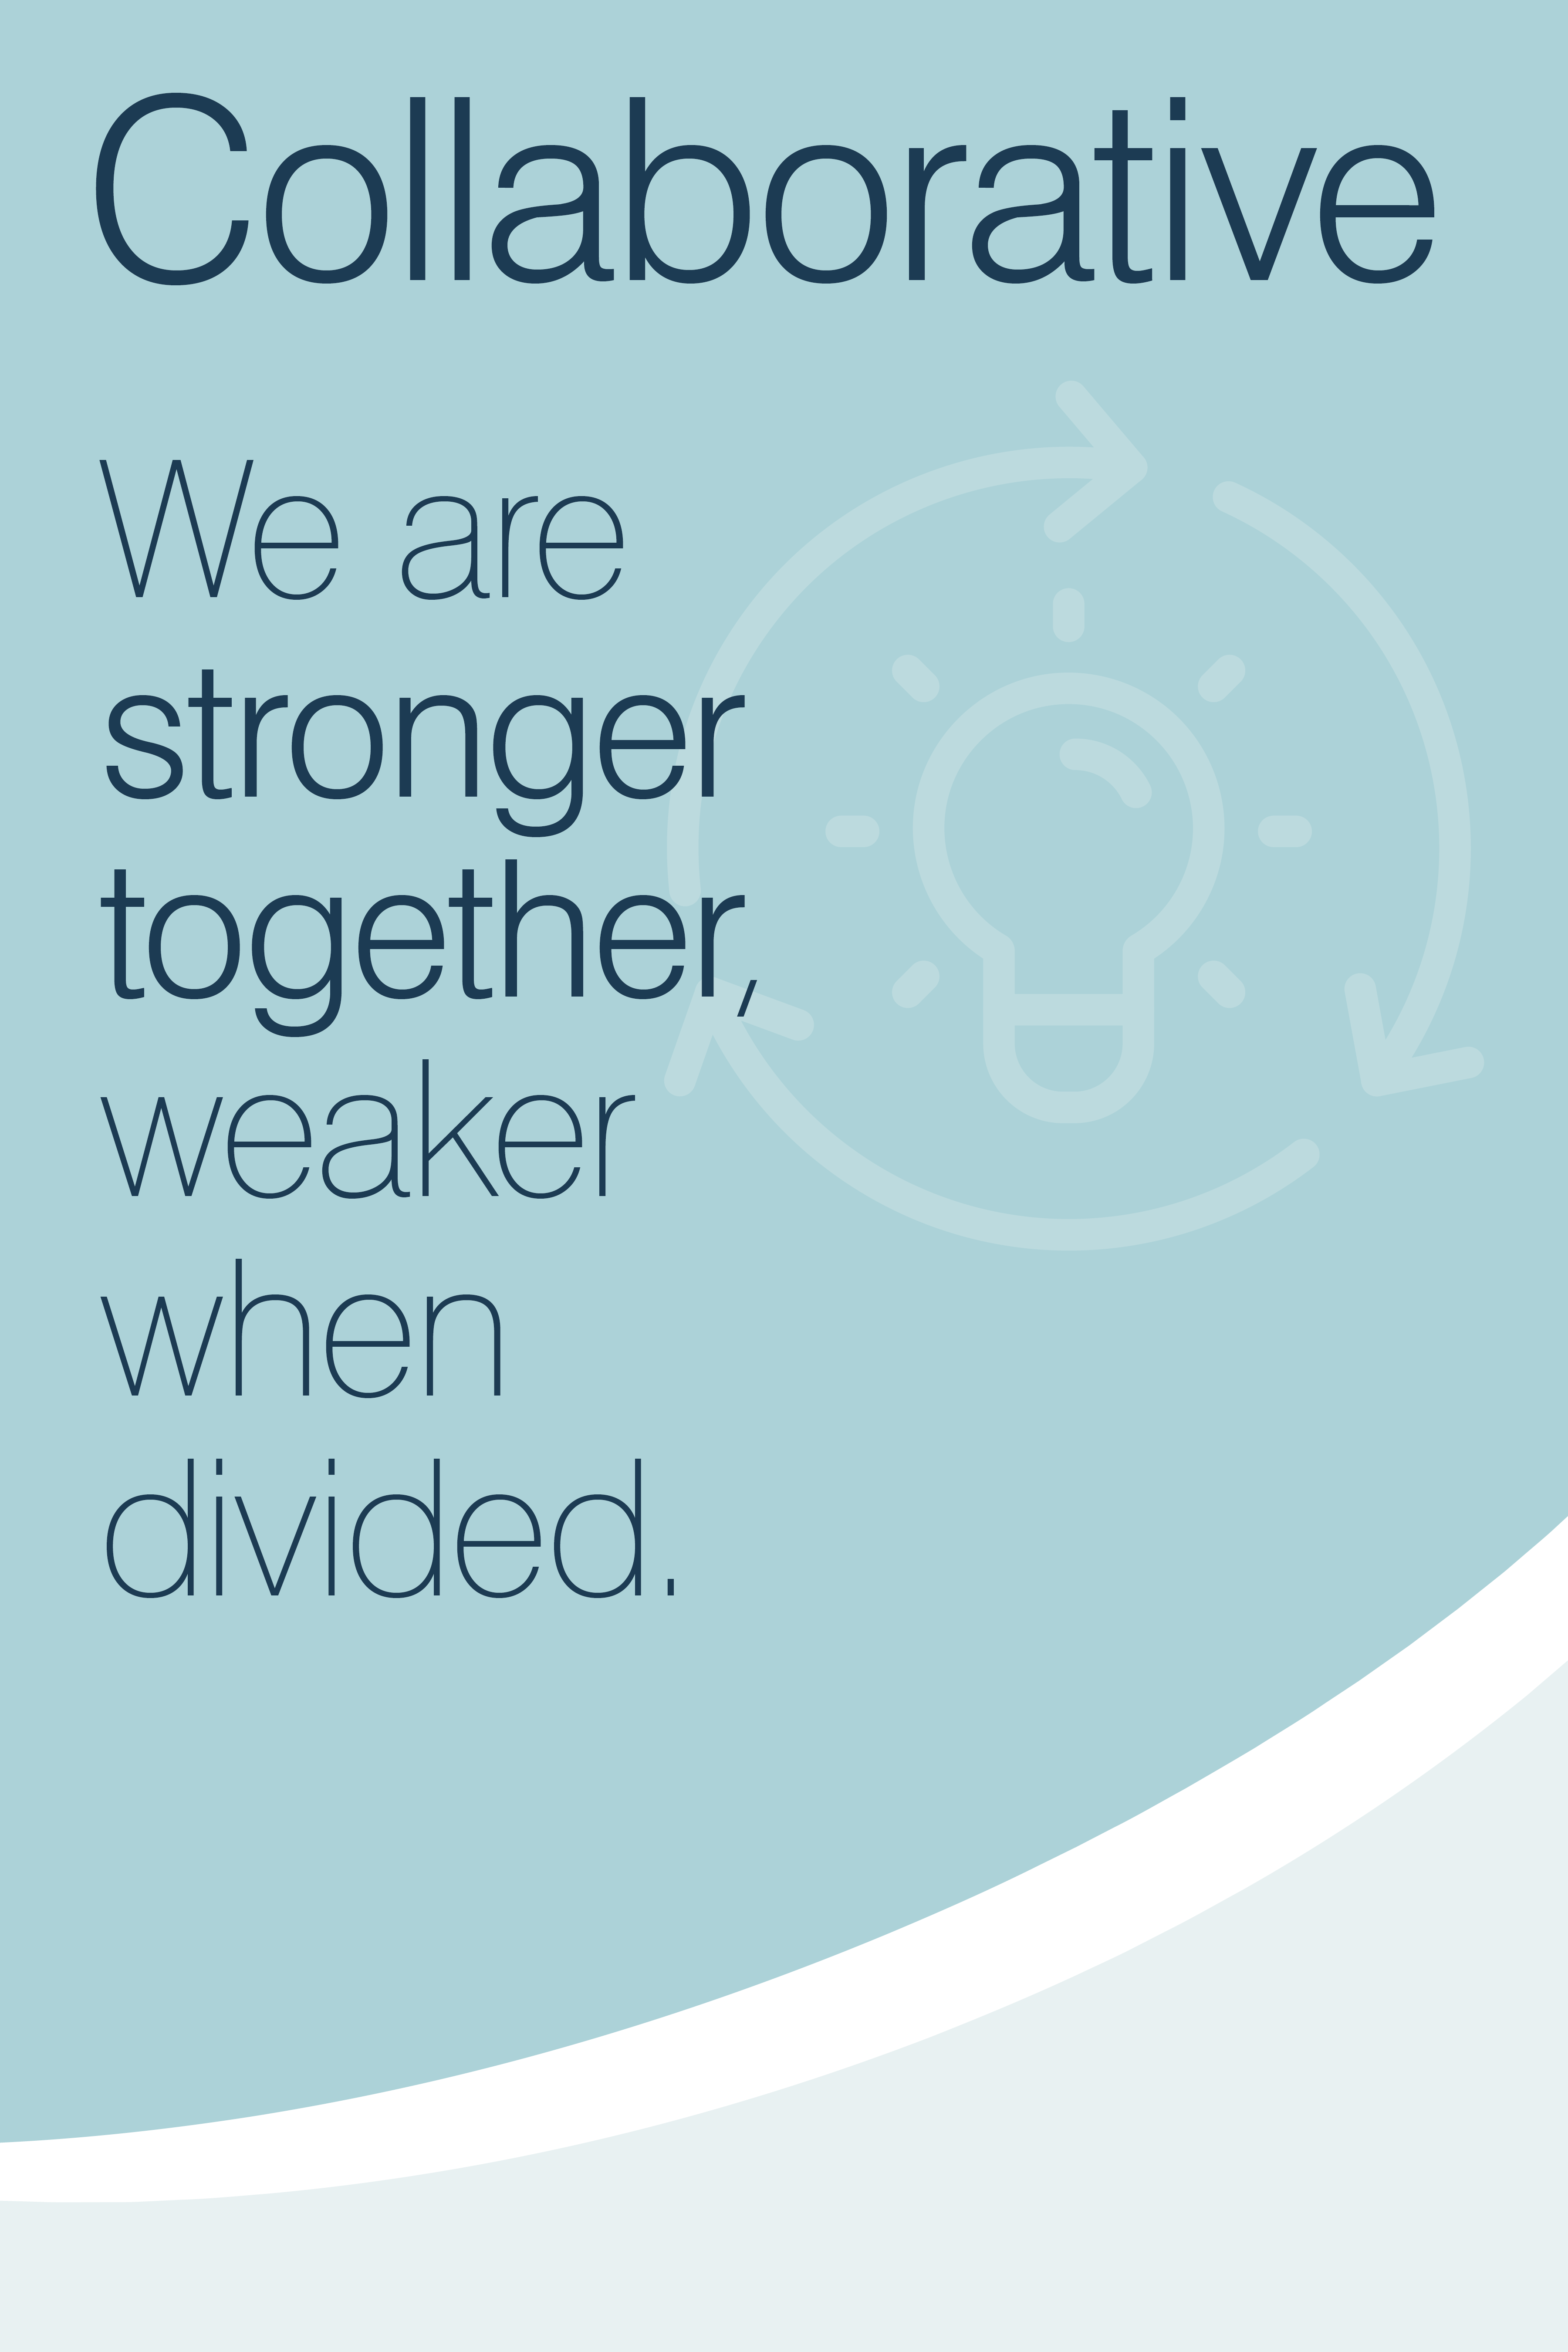 Poster text: Collaborative. We are stronger together, weaker when divided.